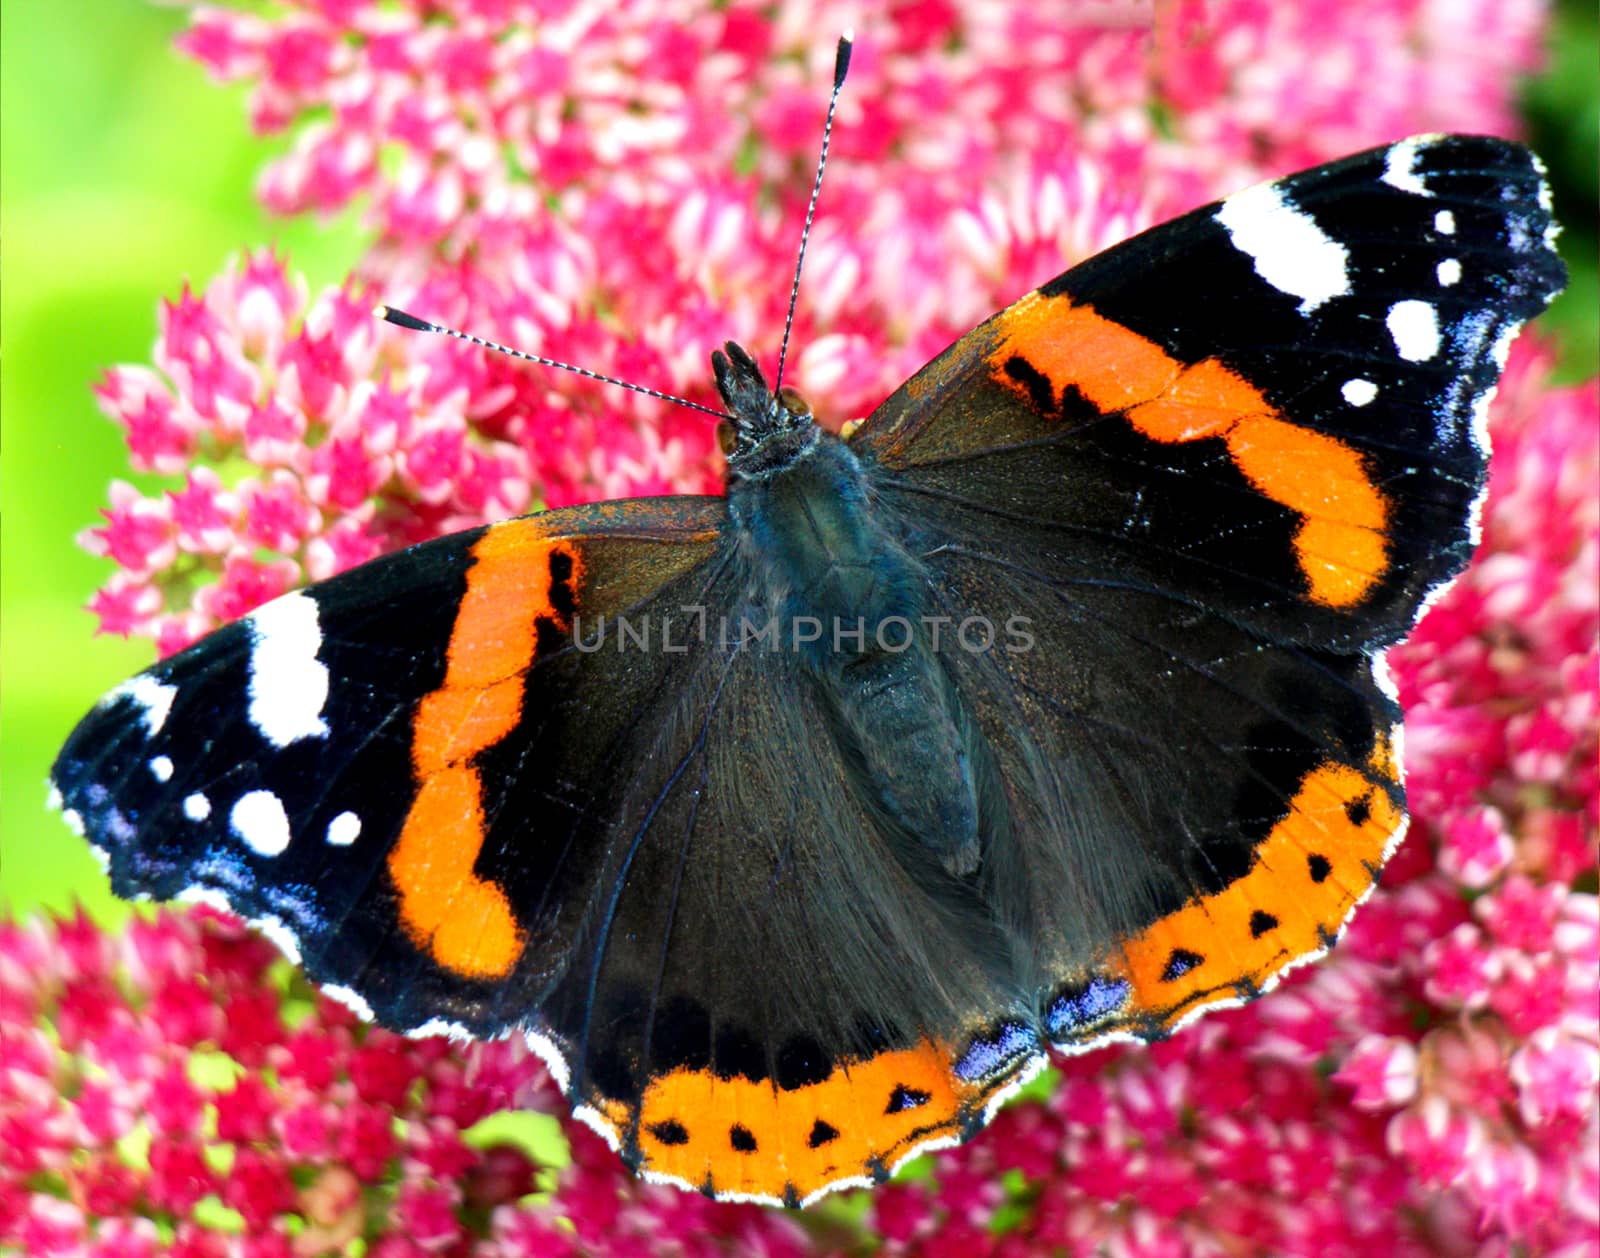 Red Admiral Butterfly by Mads_Hjorth_Jakobsen